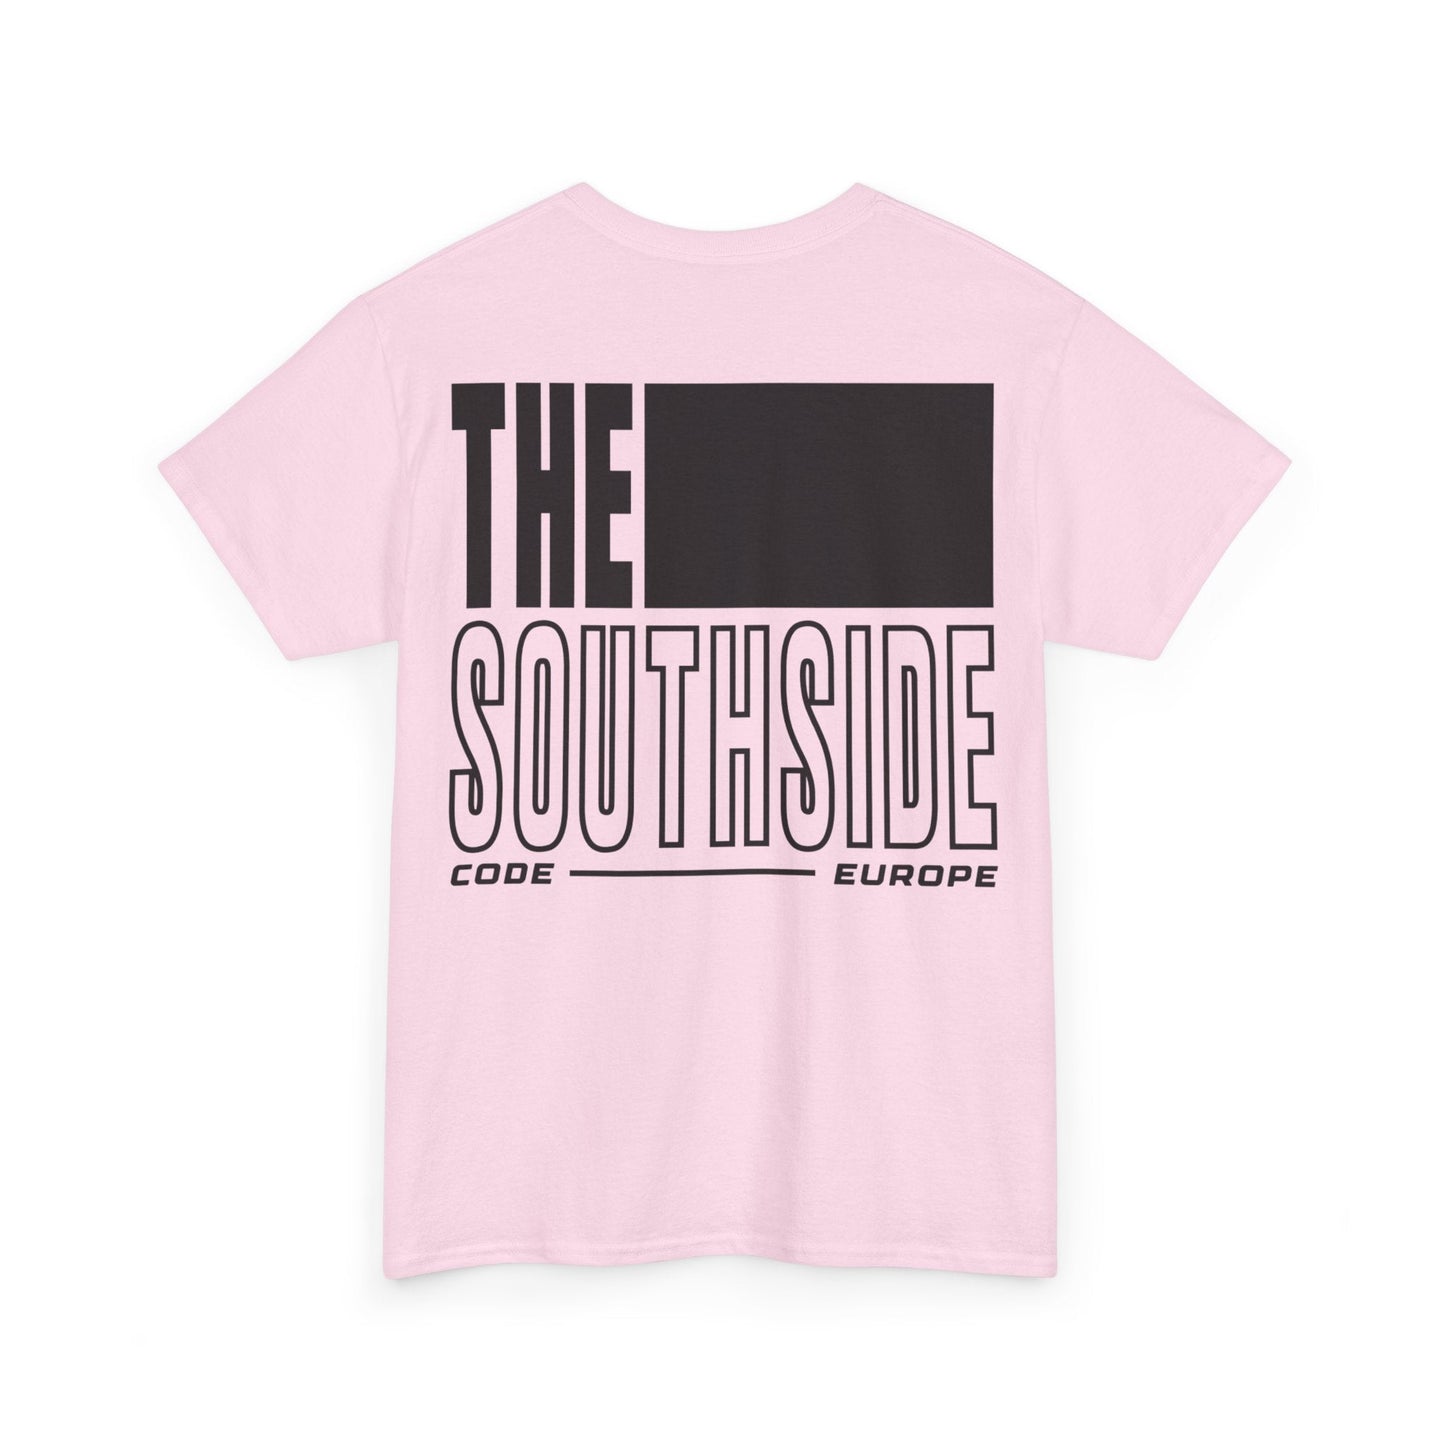 Tee NELS. 'SOUTHSIDE' Front and Back - NELS.